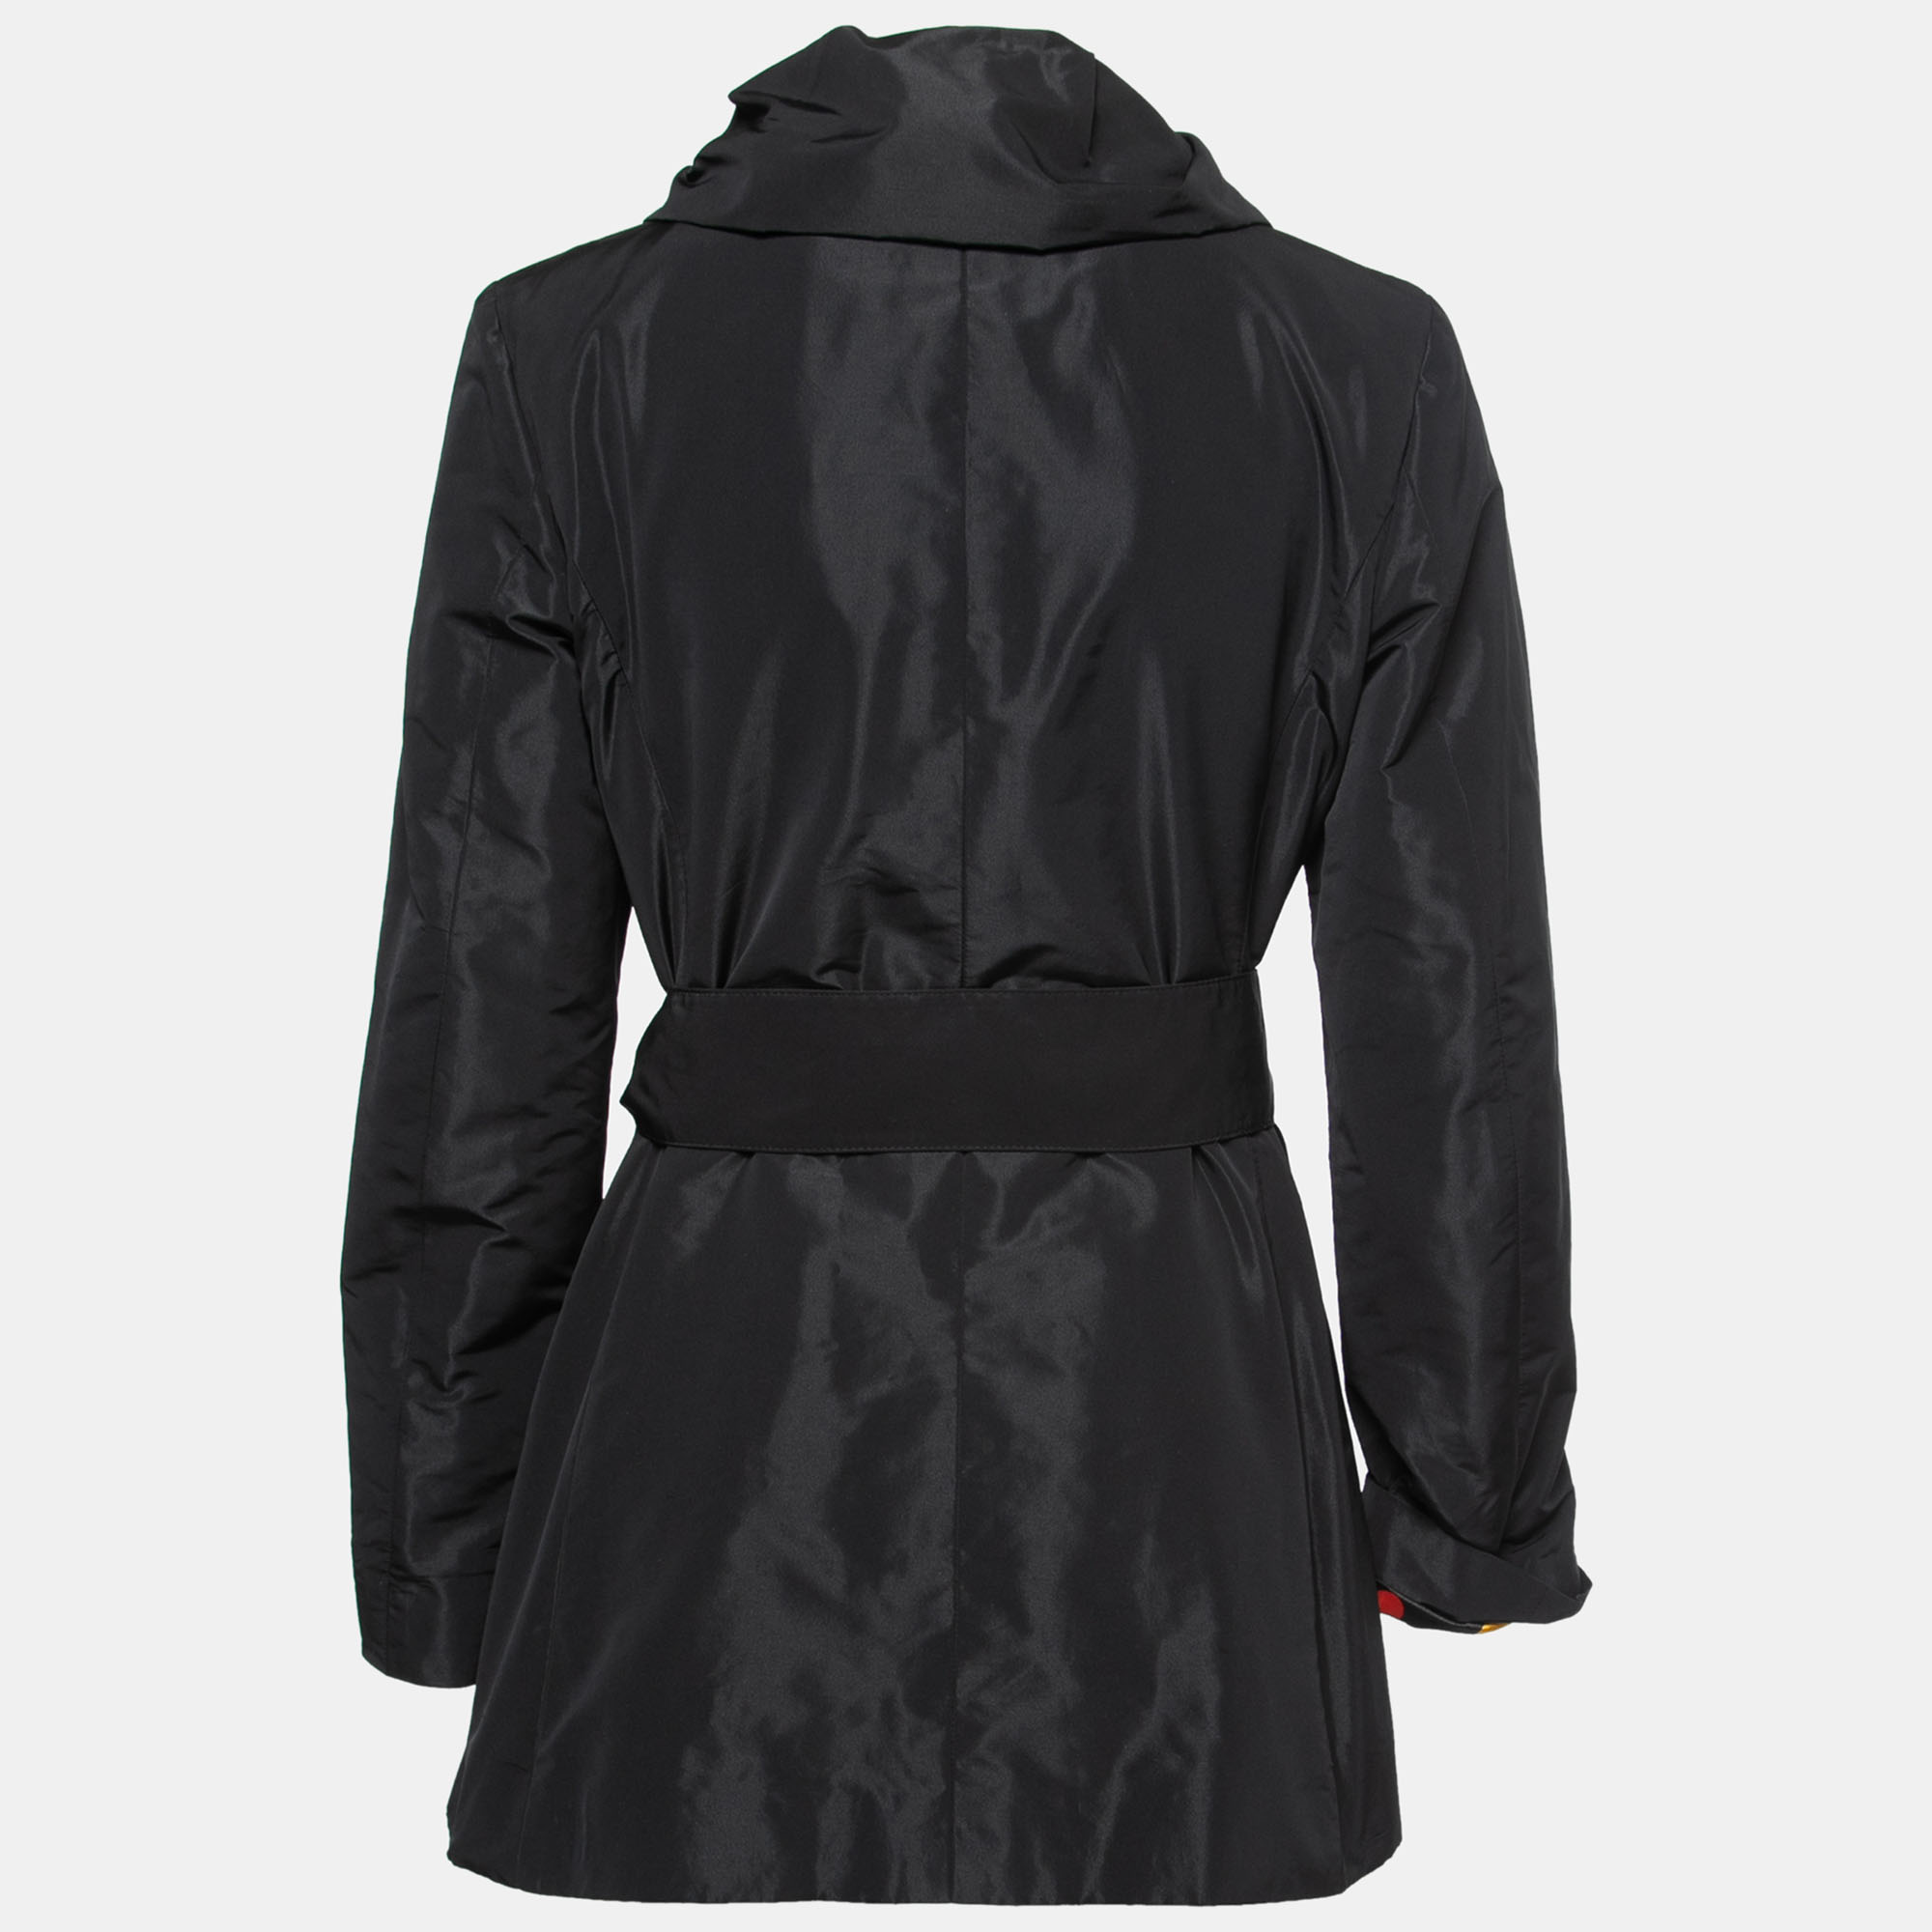 

D&G by Dolce & Gabbana Black Synthetic Ruffled Belted Jacket